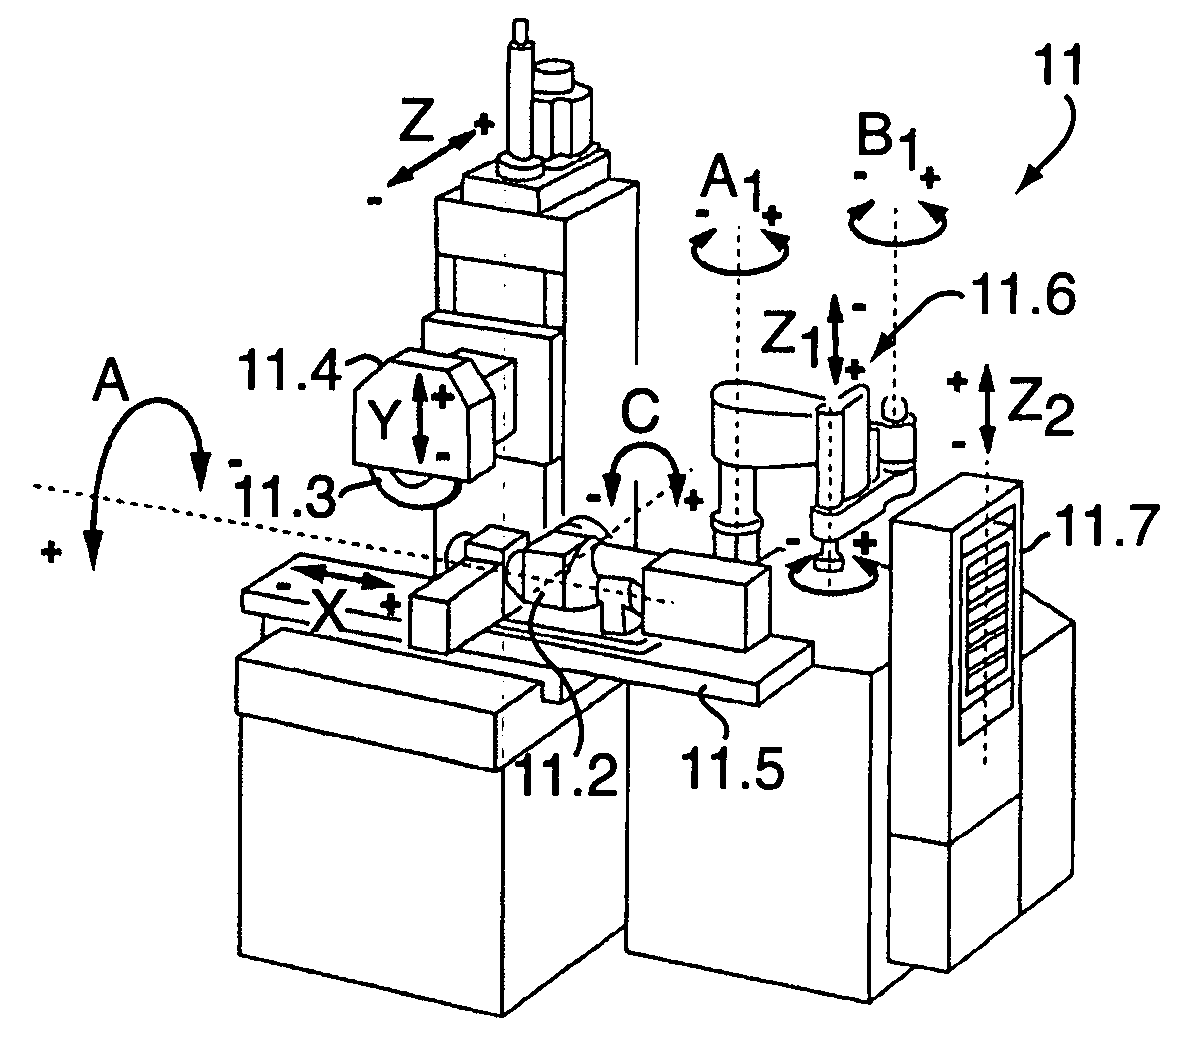 Grinding machine comprising a measuring system and control for providing a master blade and method for providing a bar blade